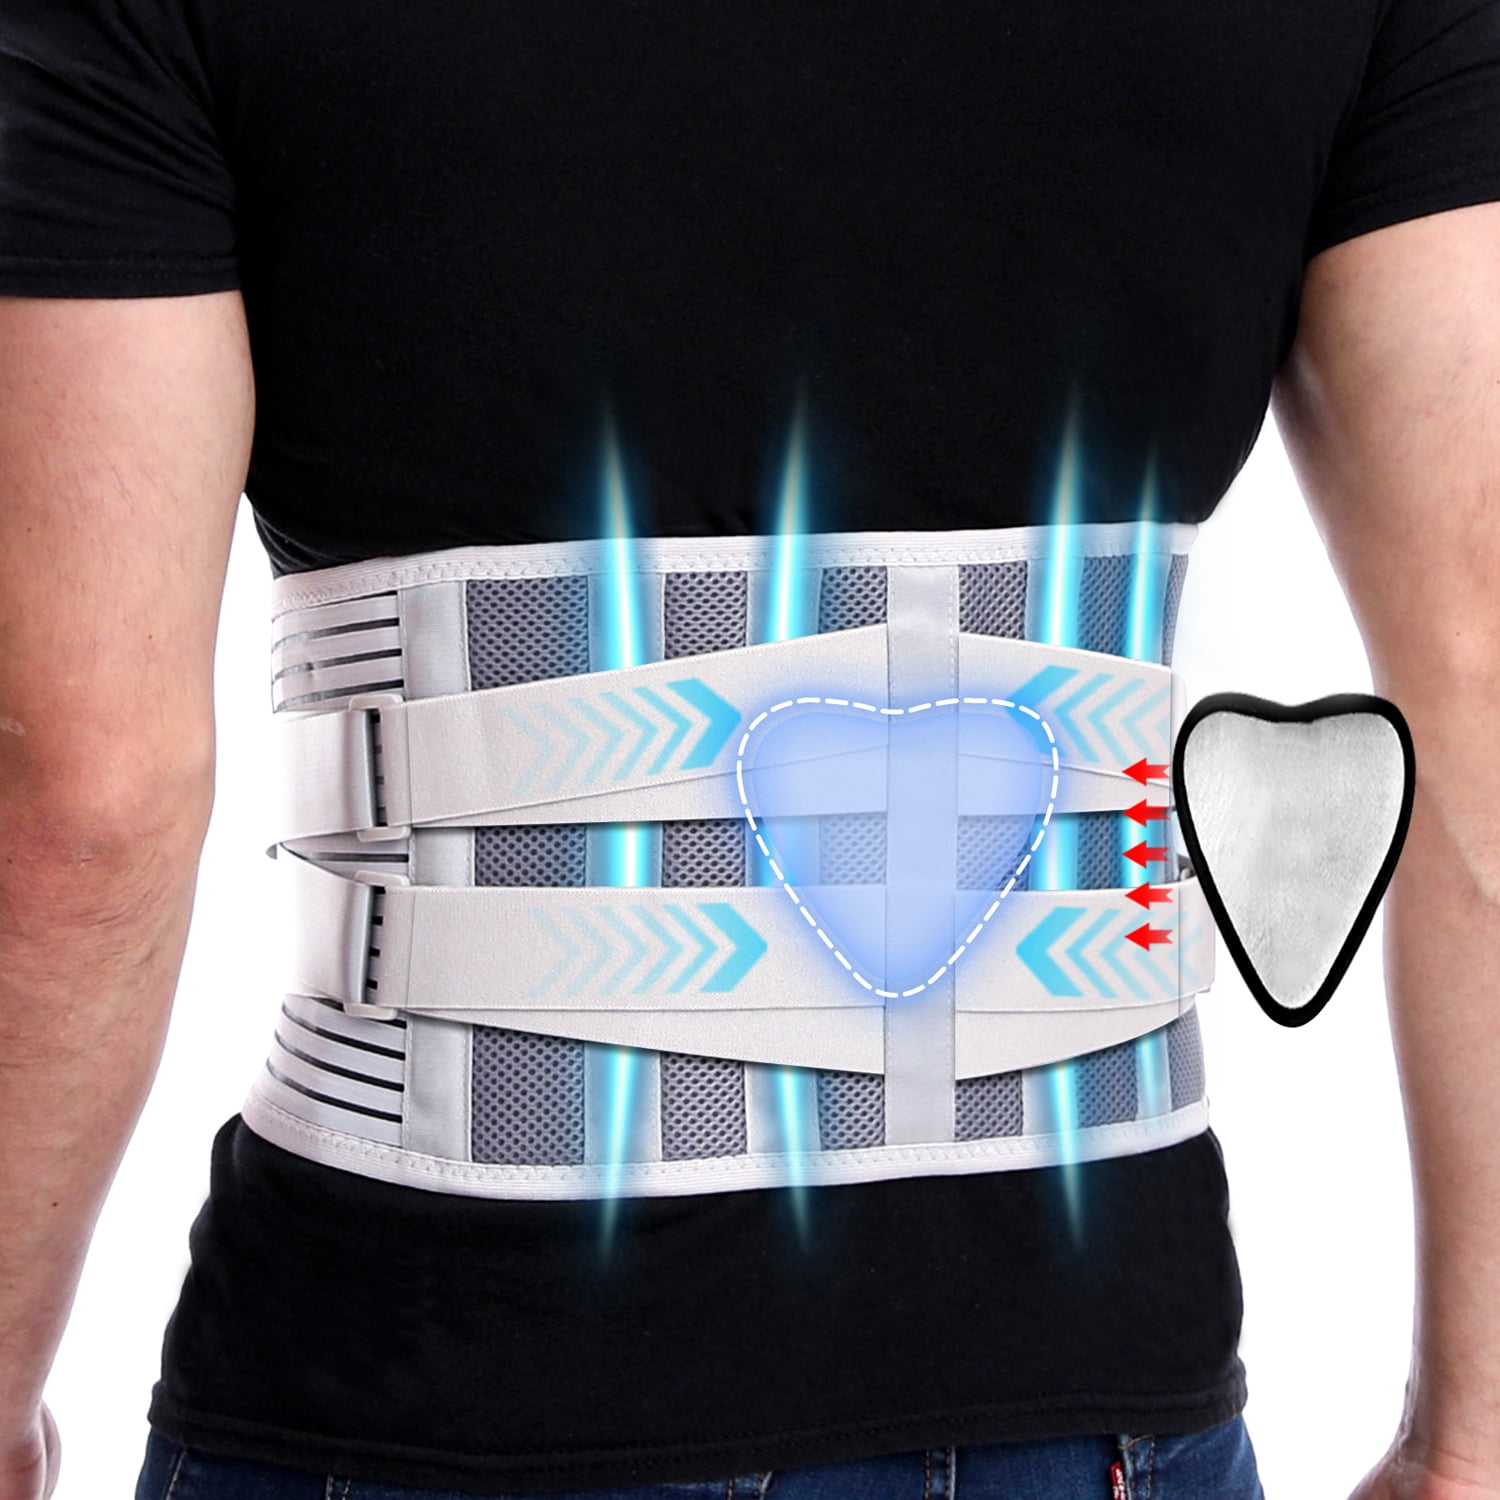 Vive Lower Back Brace for Women & Men with Cross Strap Support - Posture  Corrector Back Support Belt for Herniated Disc, Scoliosis, Sciatica Pain  Relief, & Spine Decompression - Small, Medium, Large 